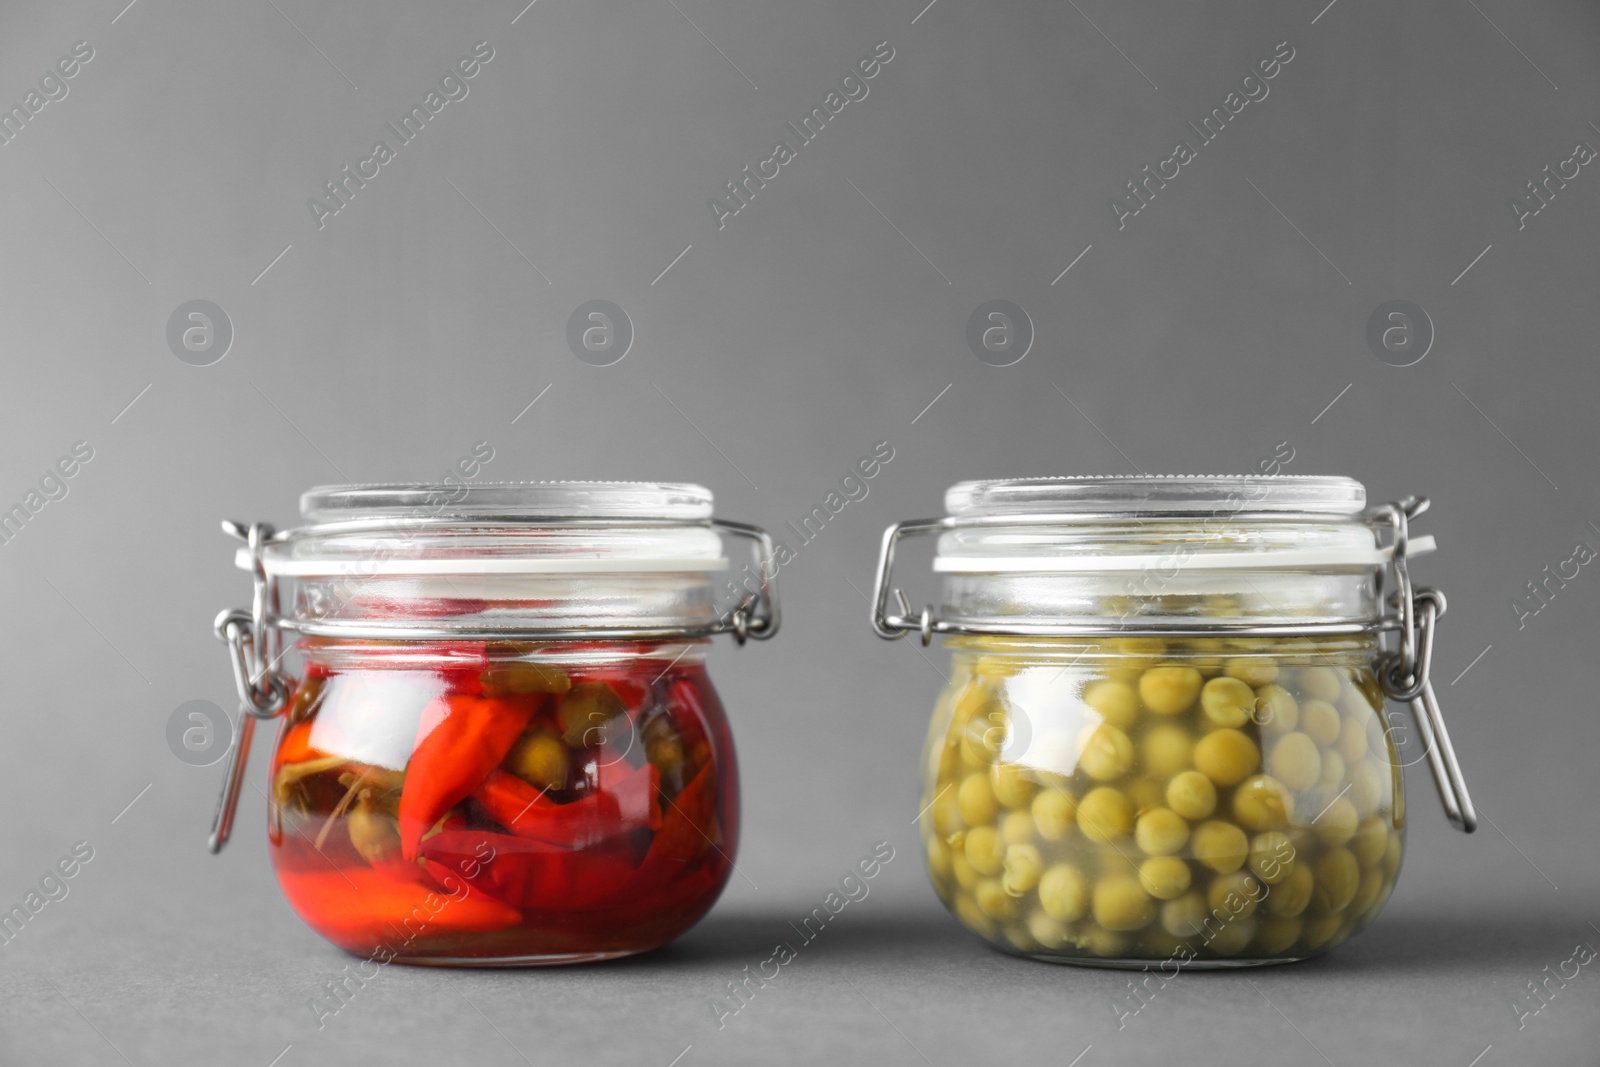 Photo of Jars of pickled red hot chili peppers and peas on grey background